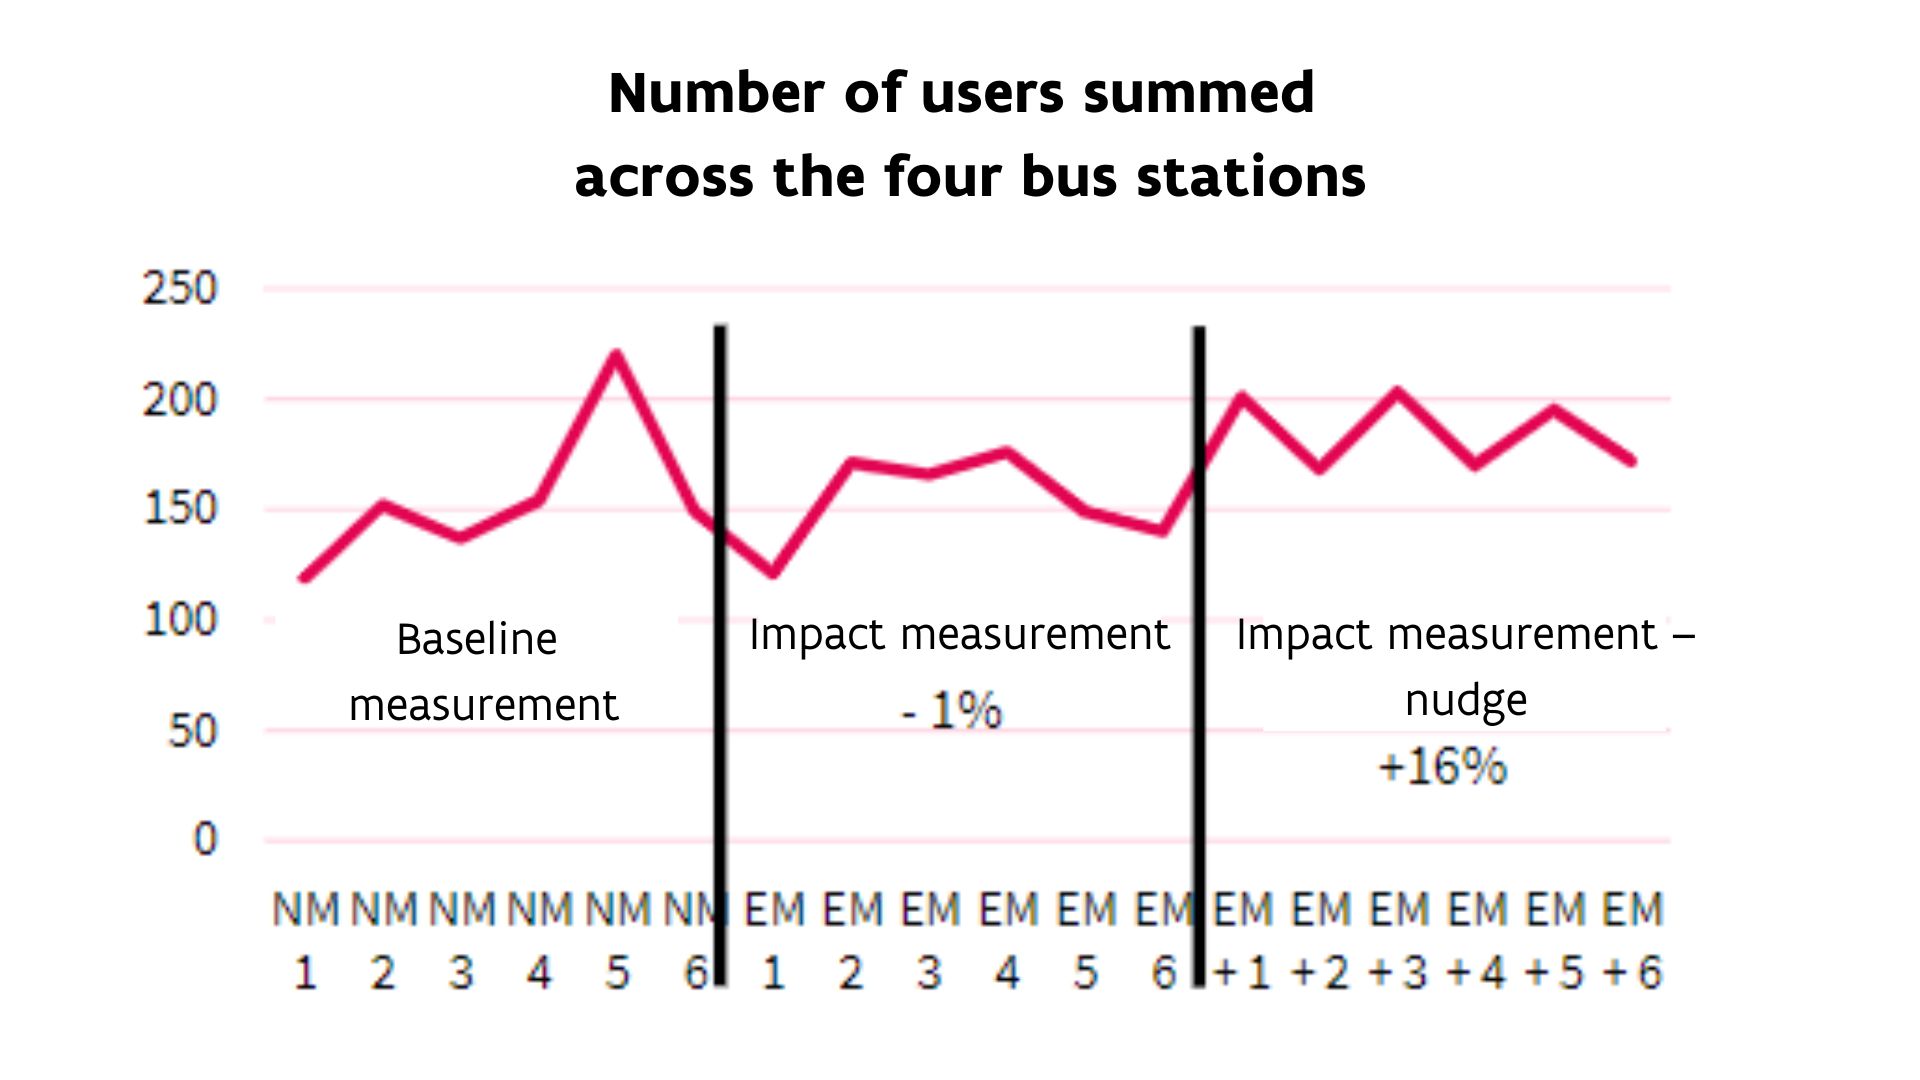 Number of users summed across the four bus stations